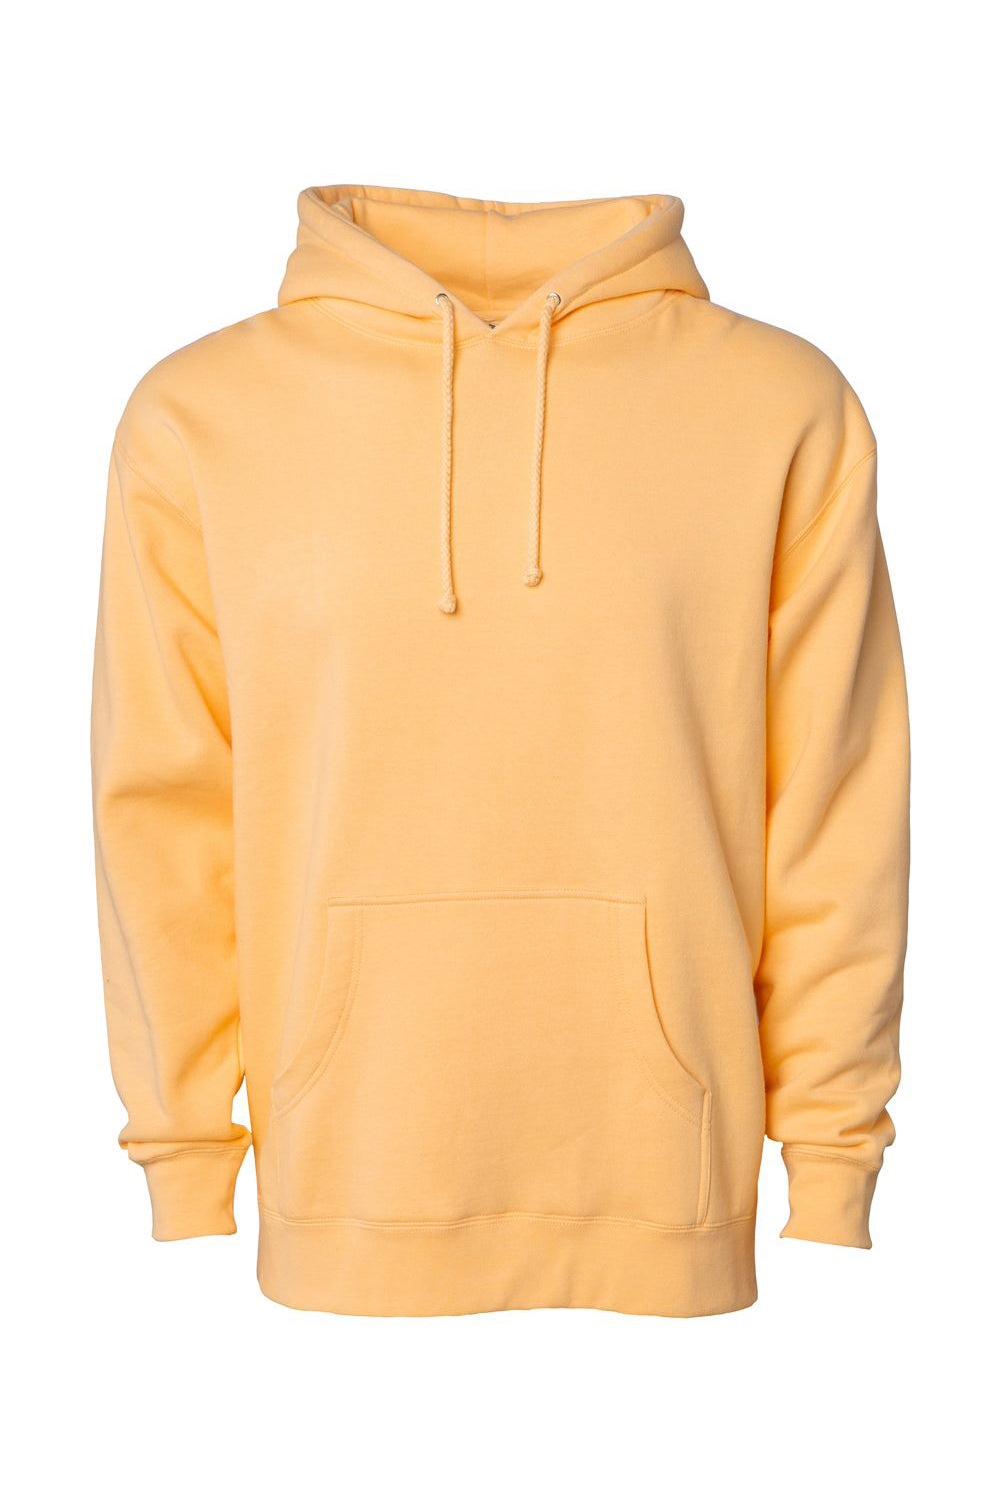 Independent Trading Co. IND4000 Mens Hooded Sweatshirt Hoodie Peach Flat Front